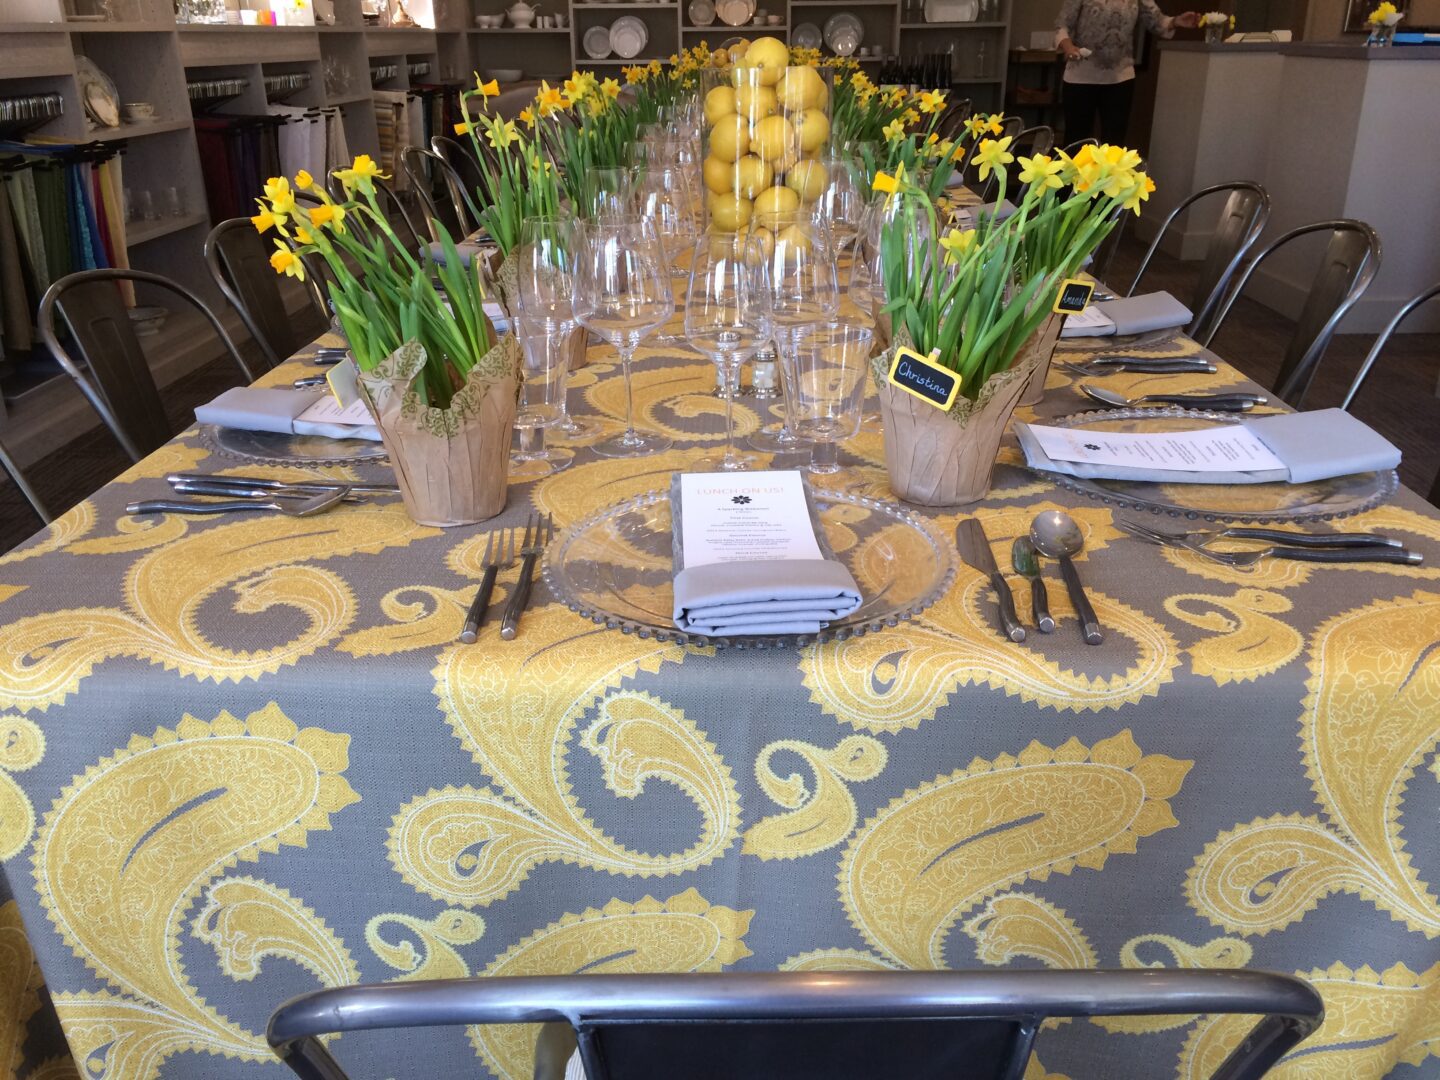 A table with a yellow and gray paisley tablecloth.